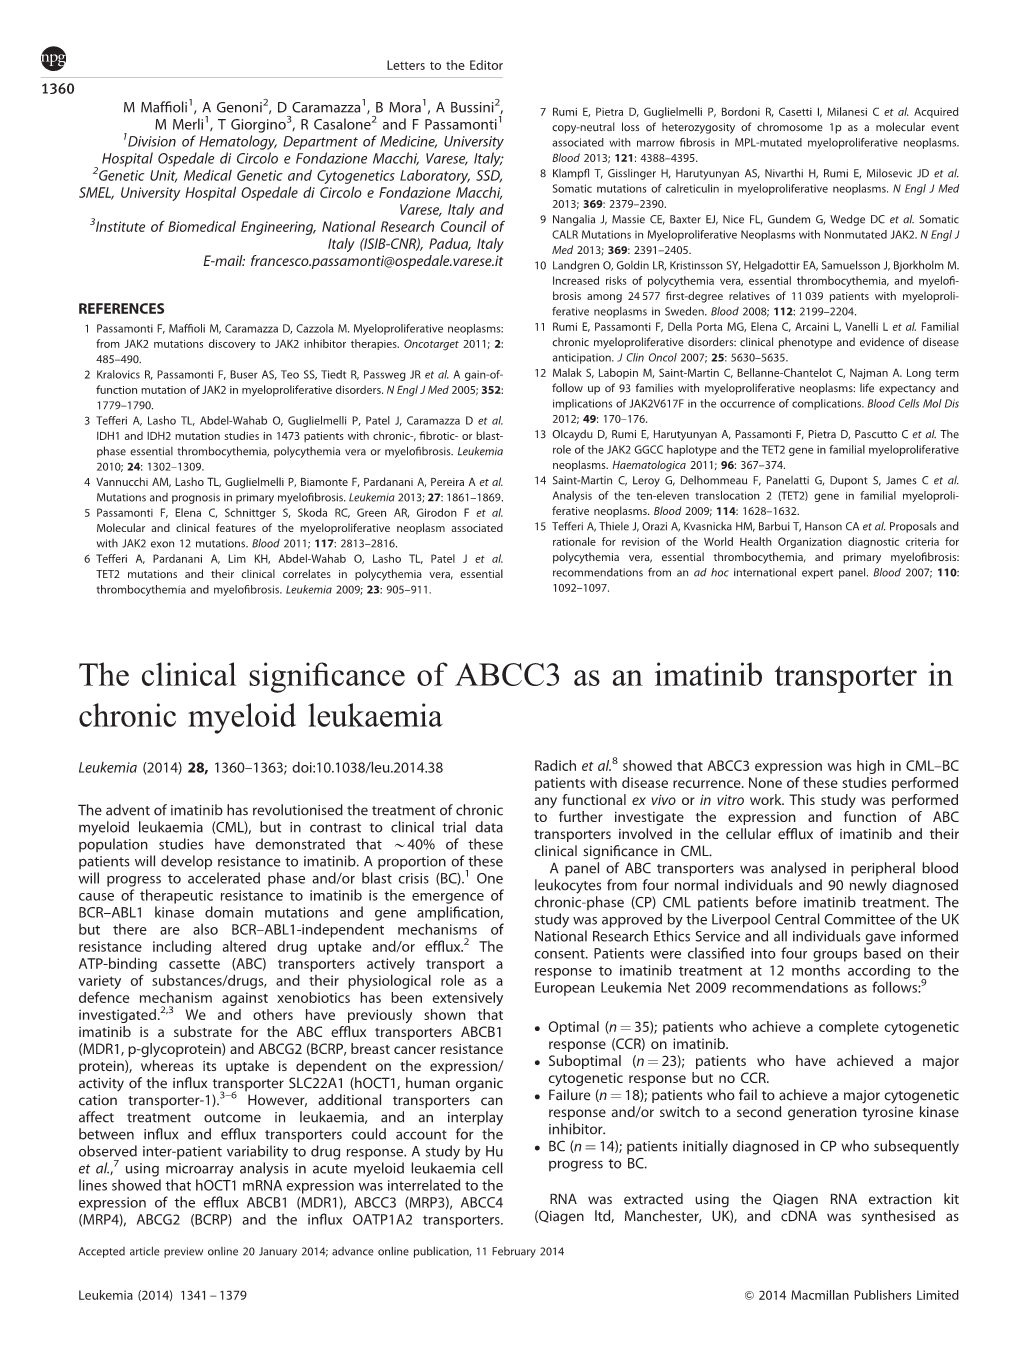 The Clinical Significance of ABCC3 As an Imatinib Transporter in Chronic